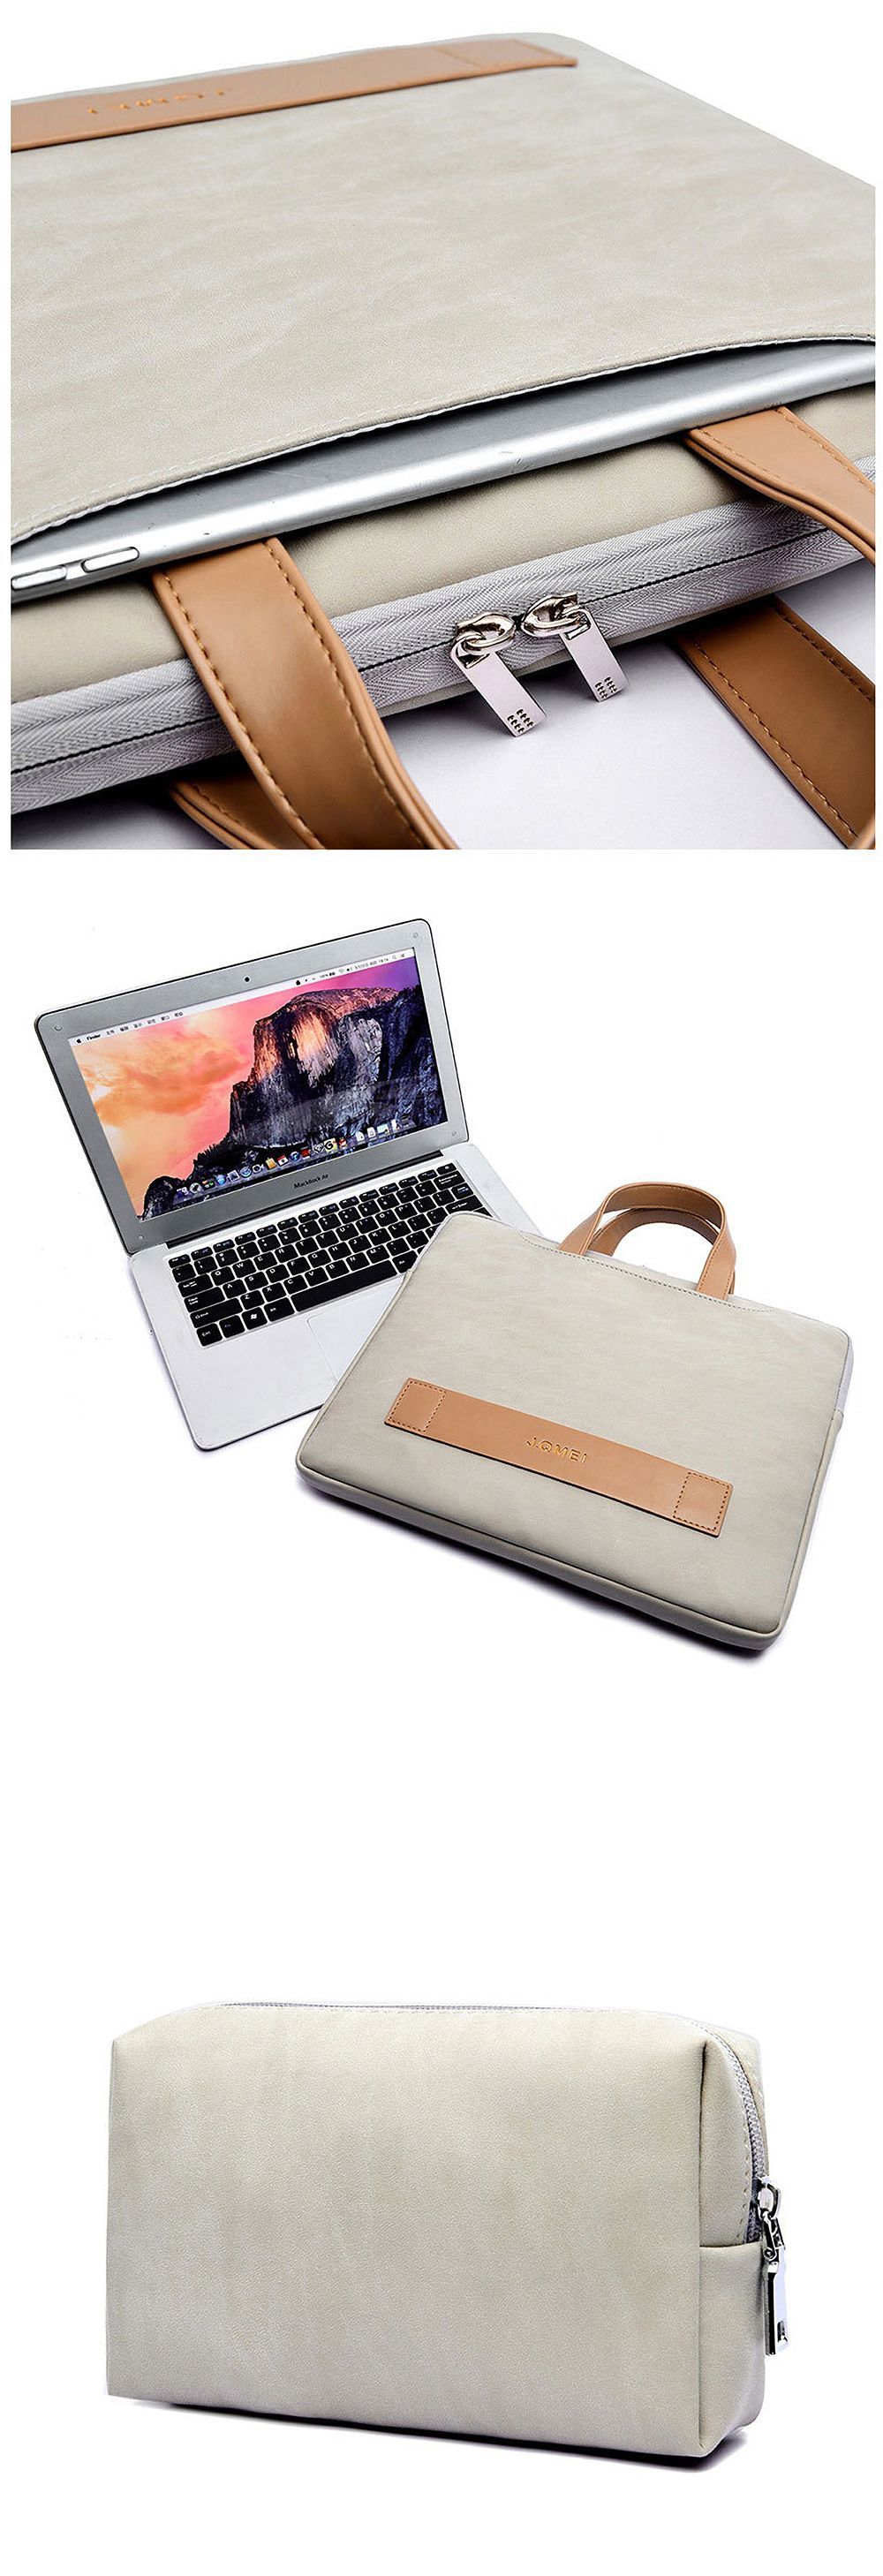 133-14-156-inch-Portable-Laptop-Bag-Waterproof-PU-Leather-Laptop-Case-Casual-Business-Handbag-for-Me-1576210